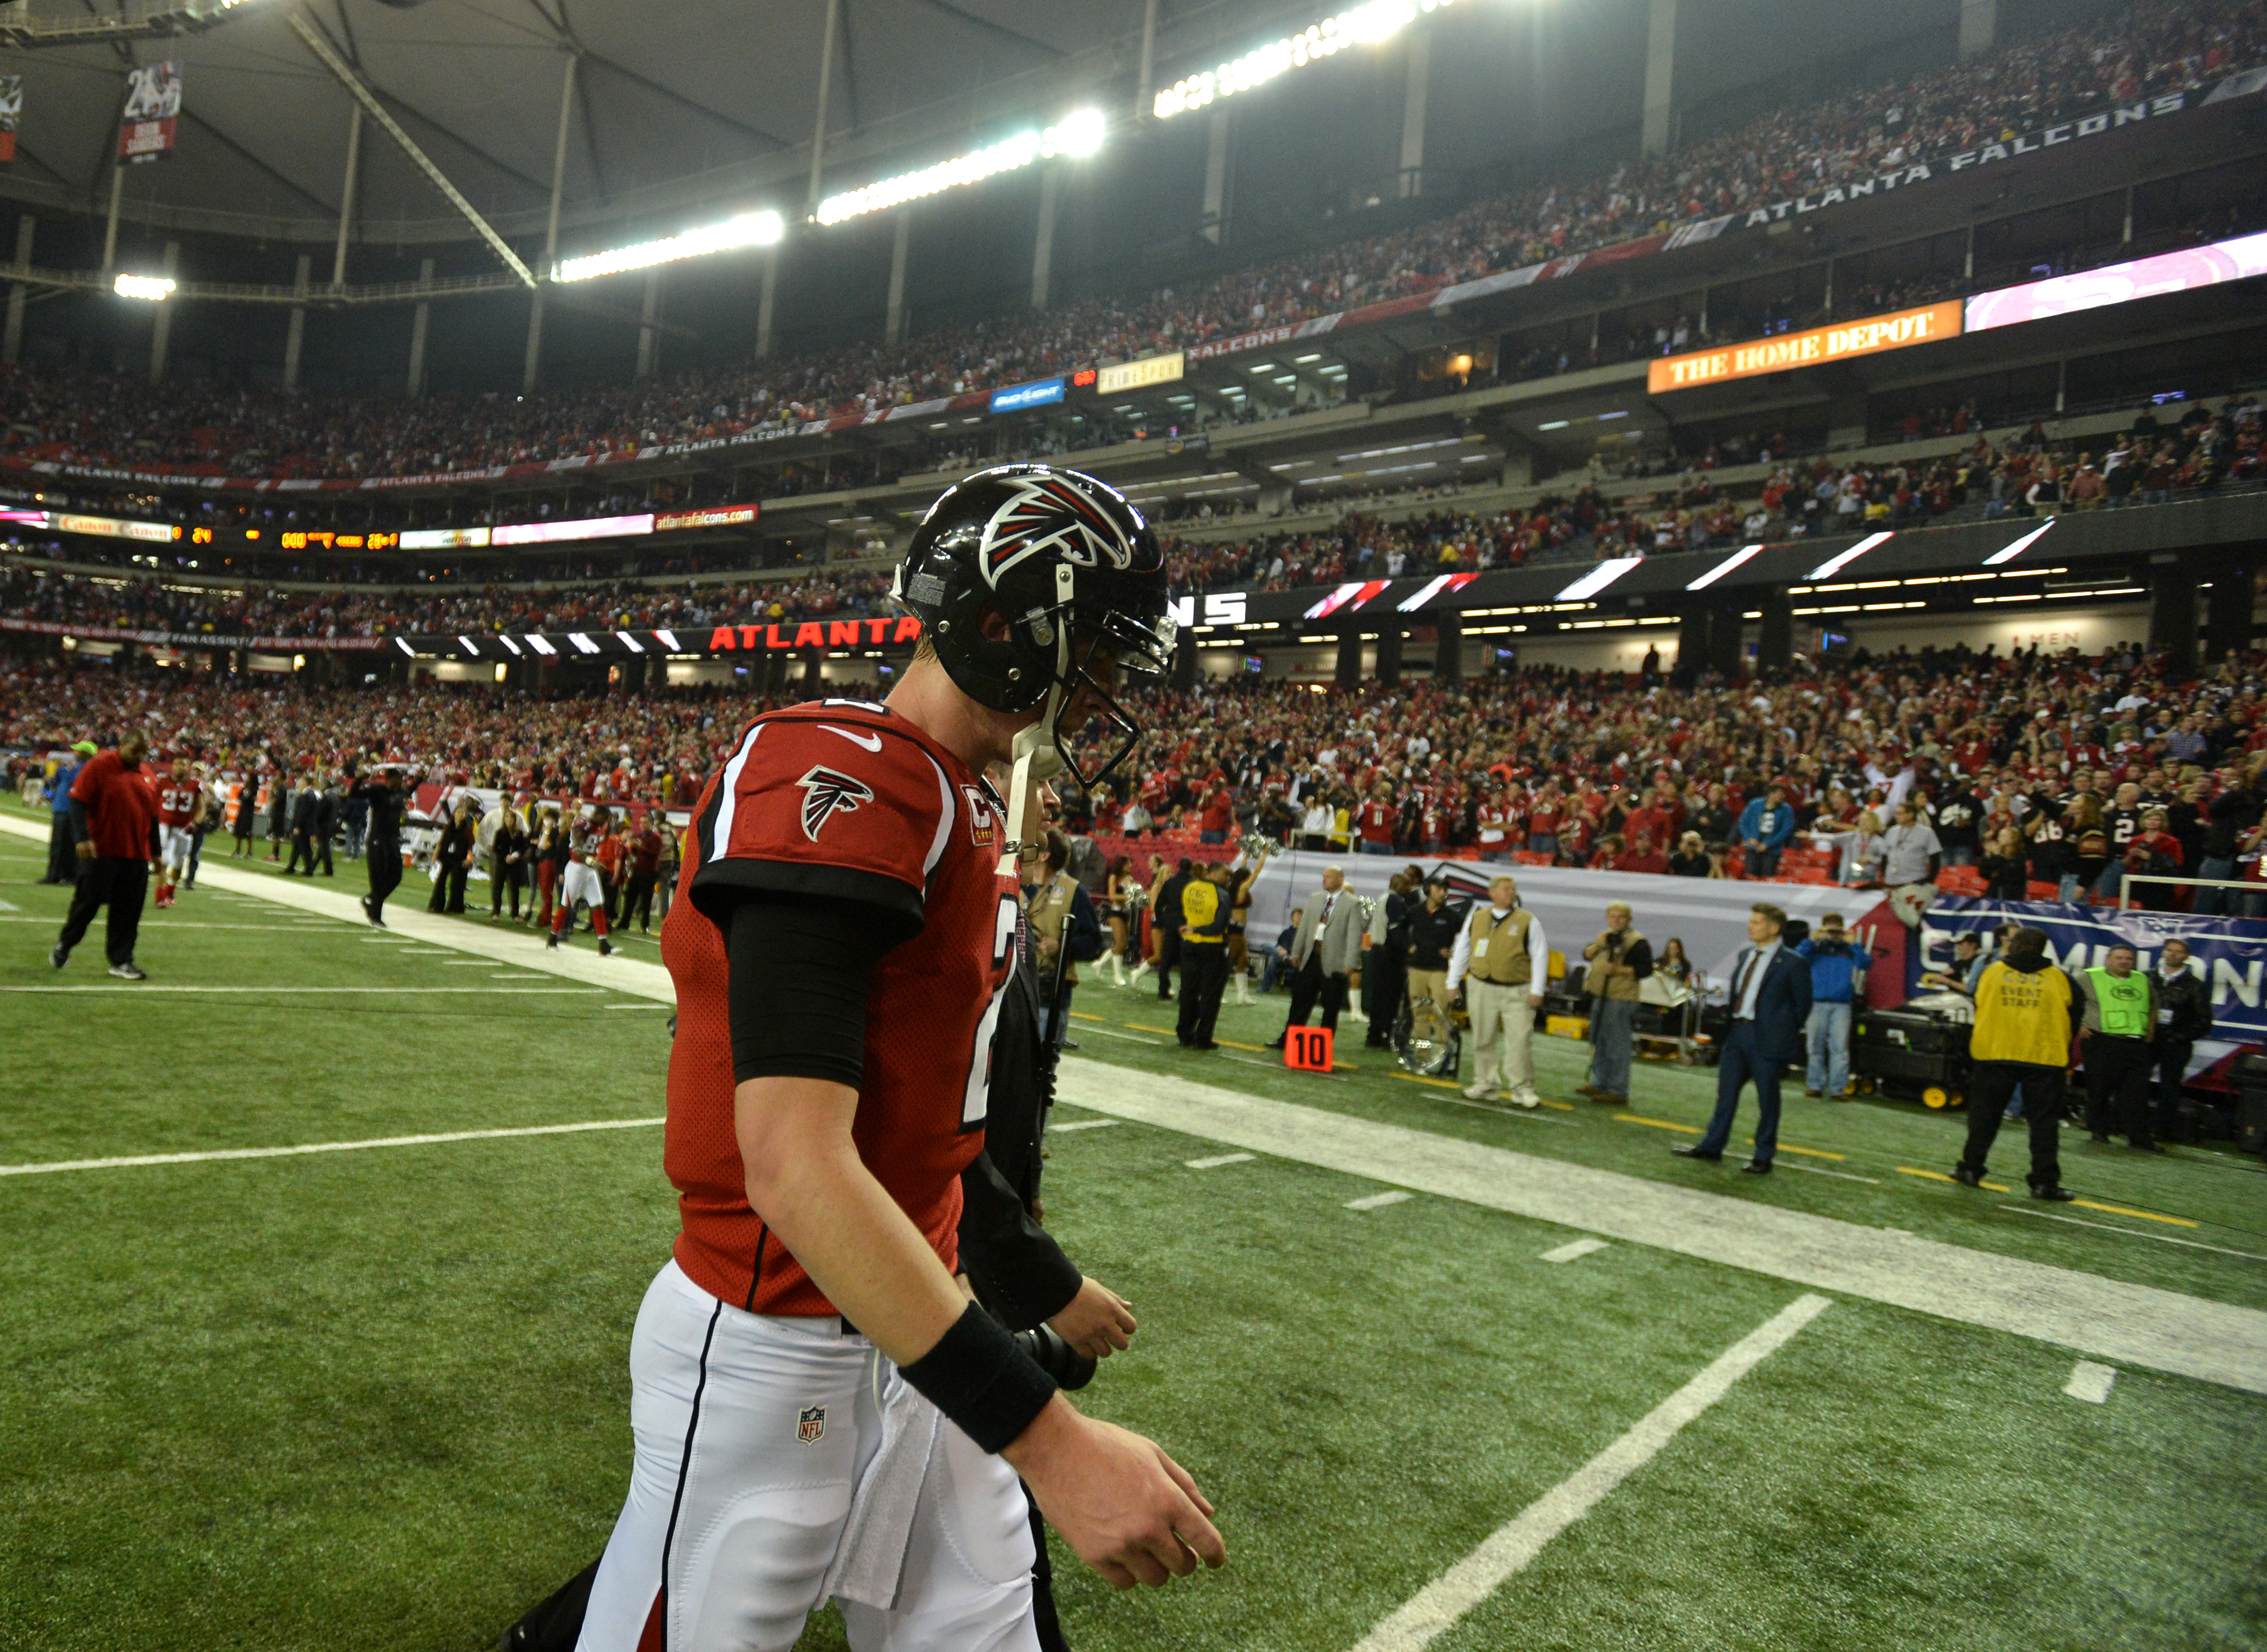 N.F.C. Championship Replay: 49ers 28, Falcons 24 - The New York Times